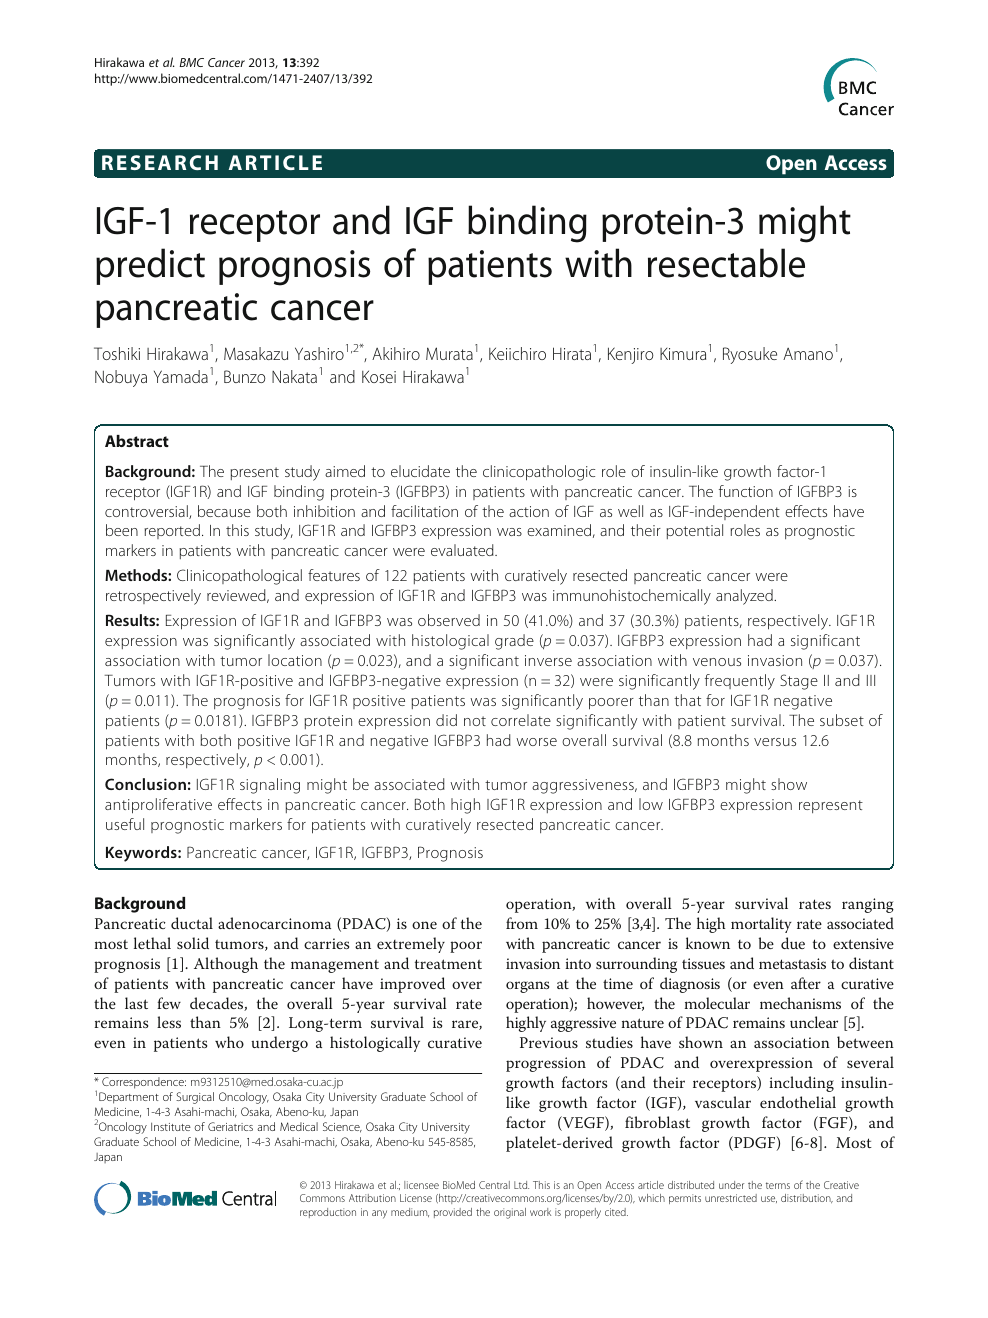 Igf 1 Receptor And Igf Binding Protein 3 Might Predict Prognosis Of Patients With Resectable Pancreatic Cancer Topic Of Research Paper In Clinical Medicine Download Scholarly Article Pdf And Read For Free On